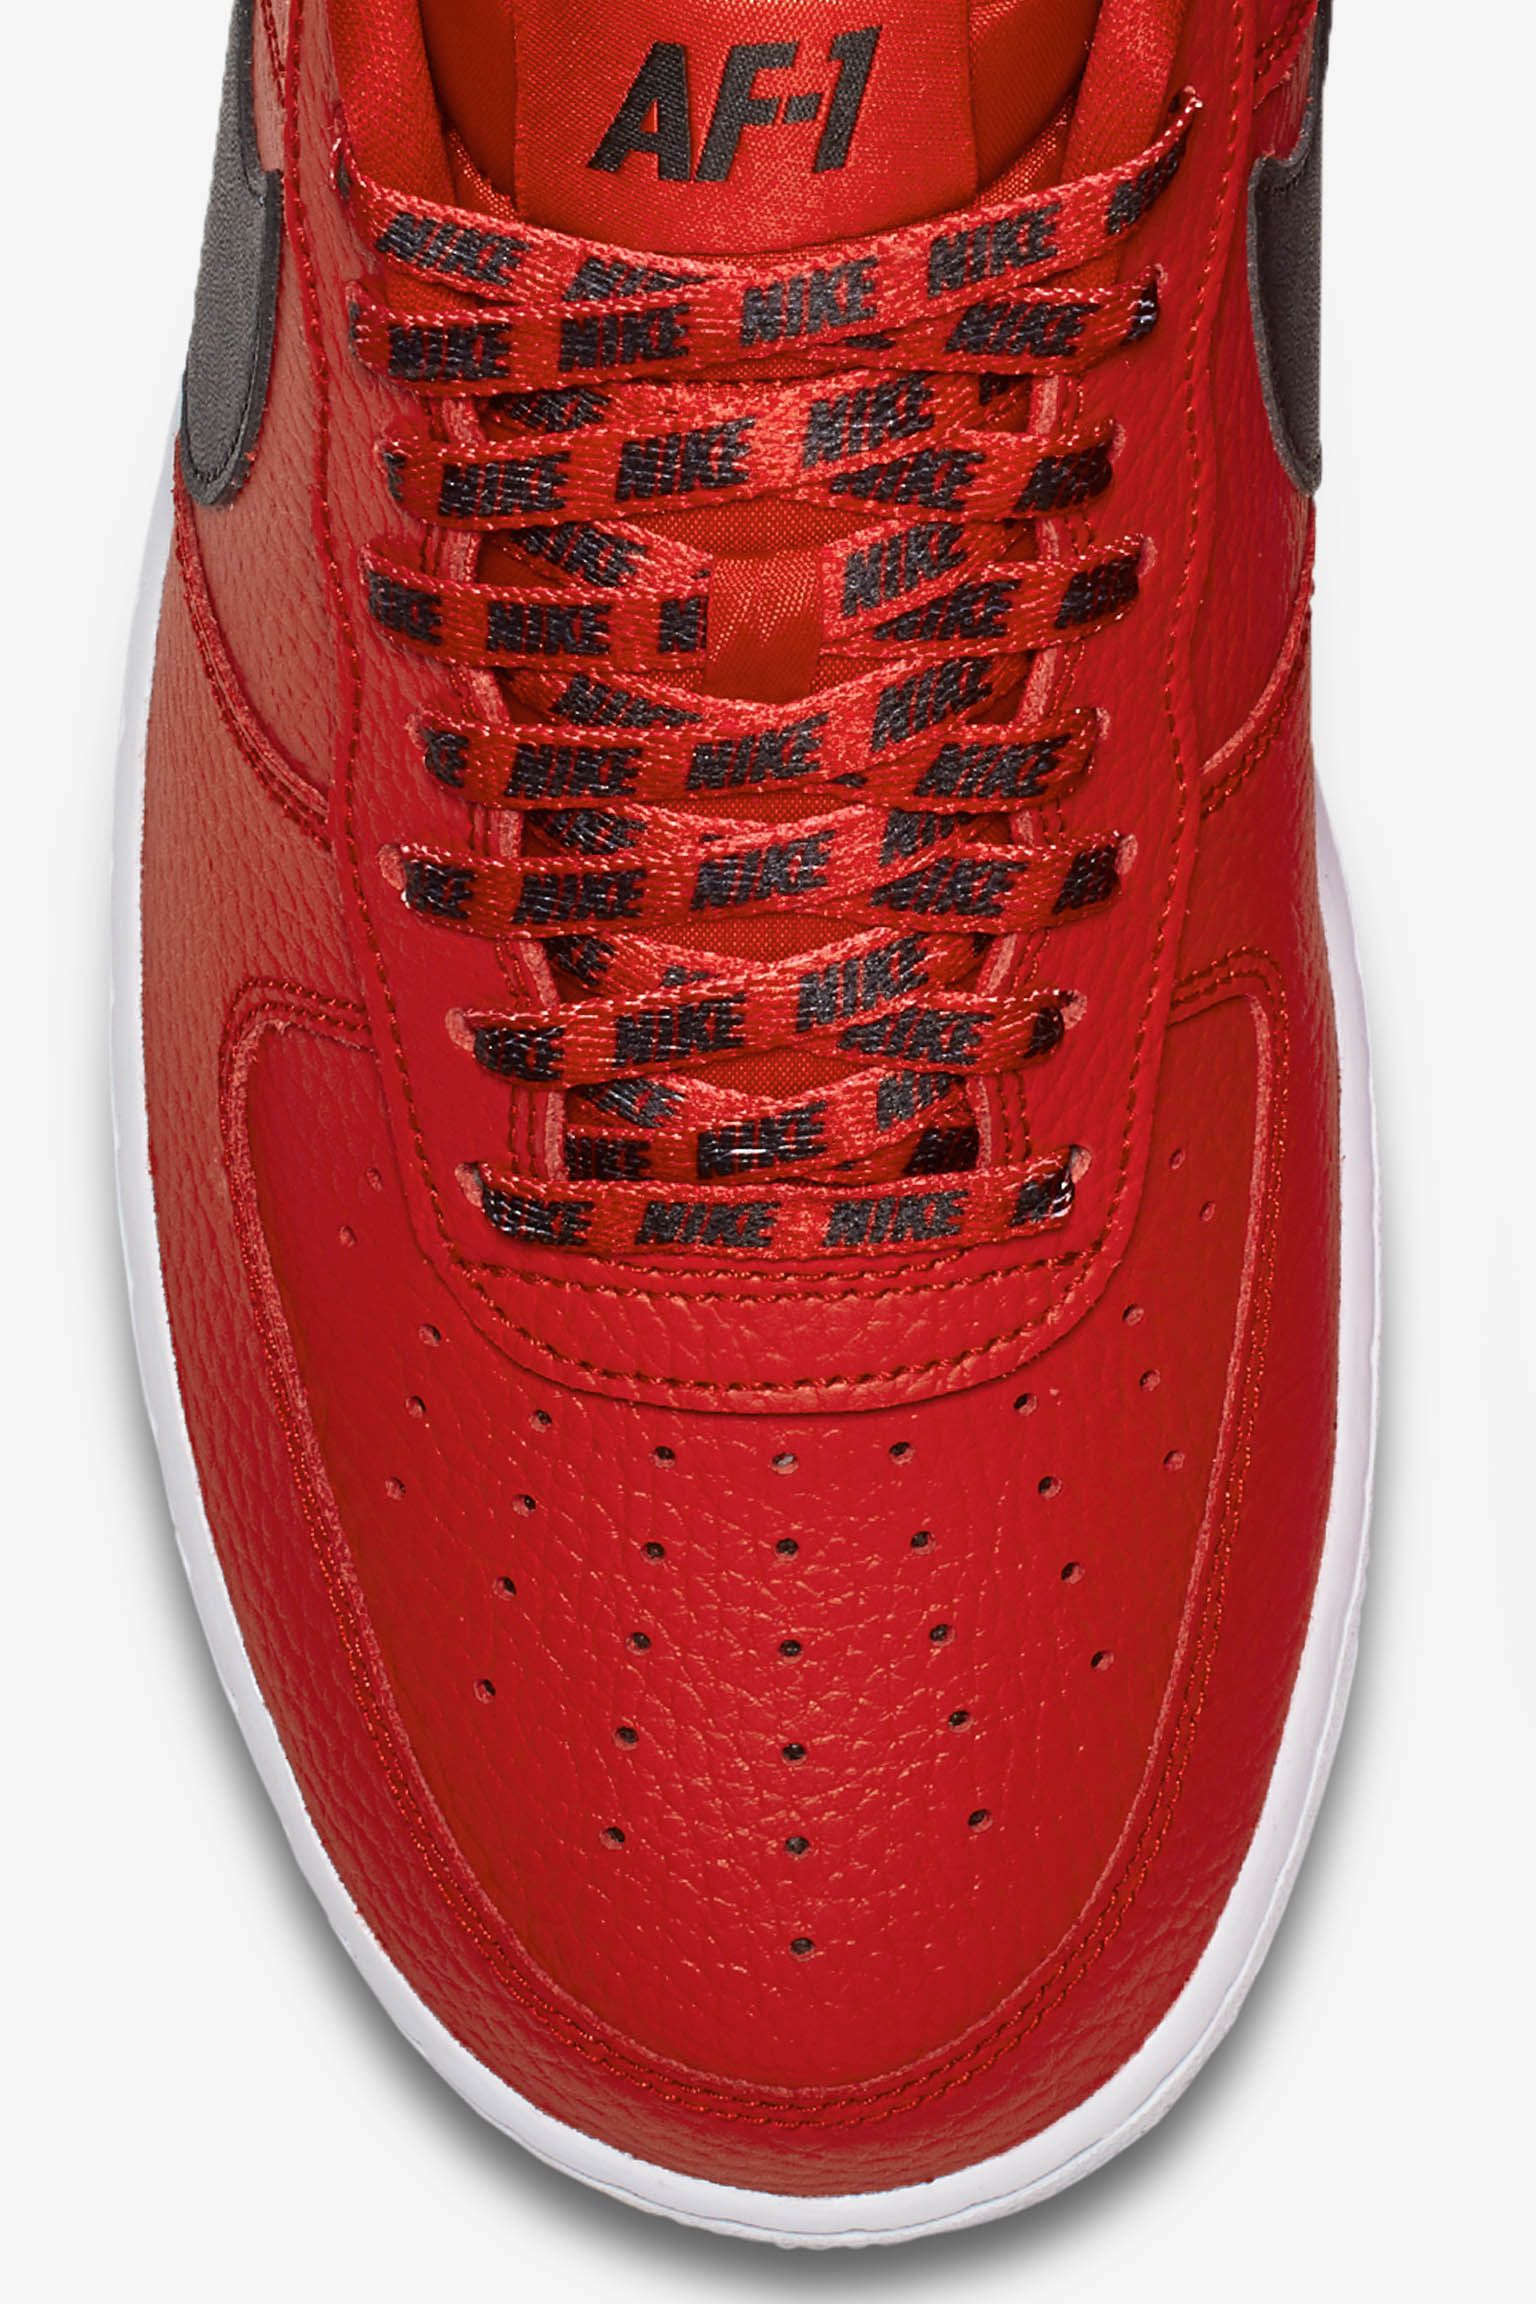 air force 1 low nba university red